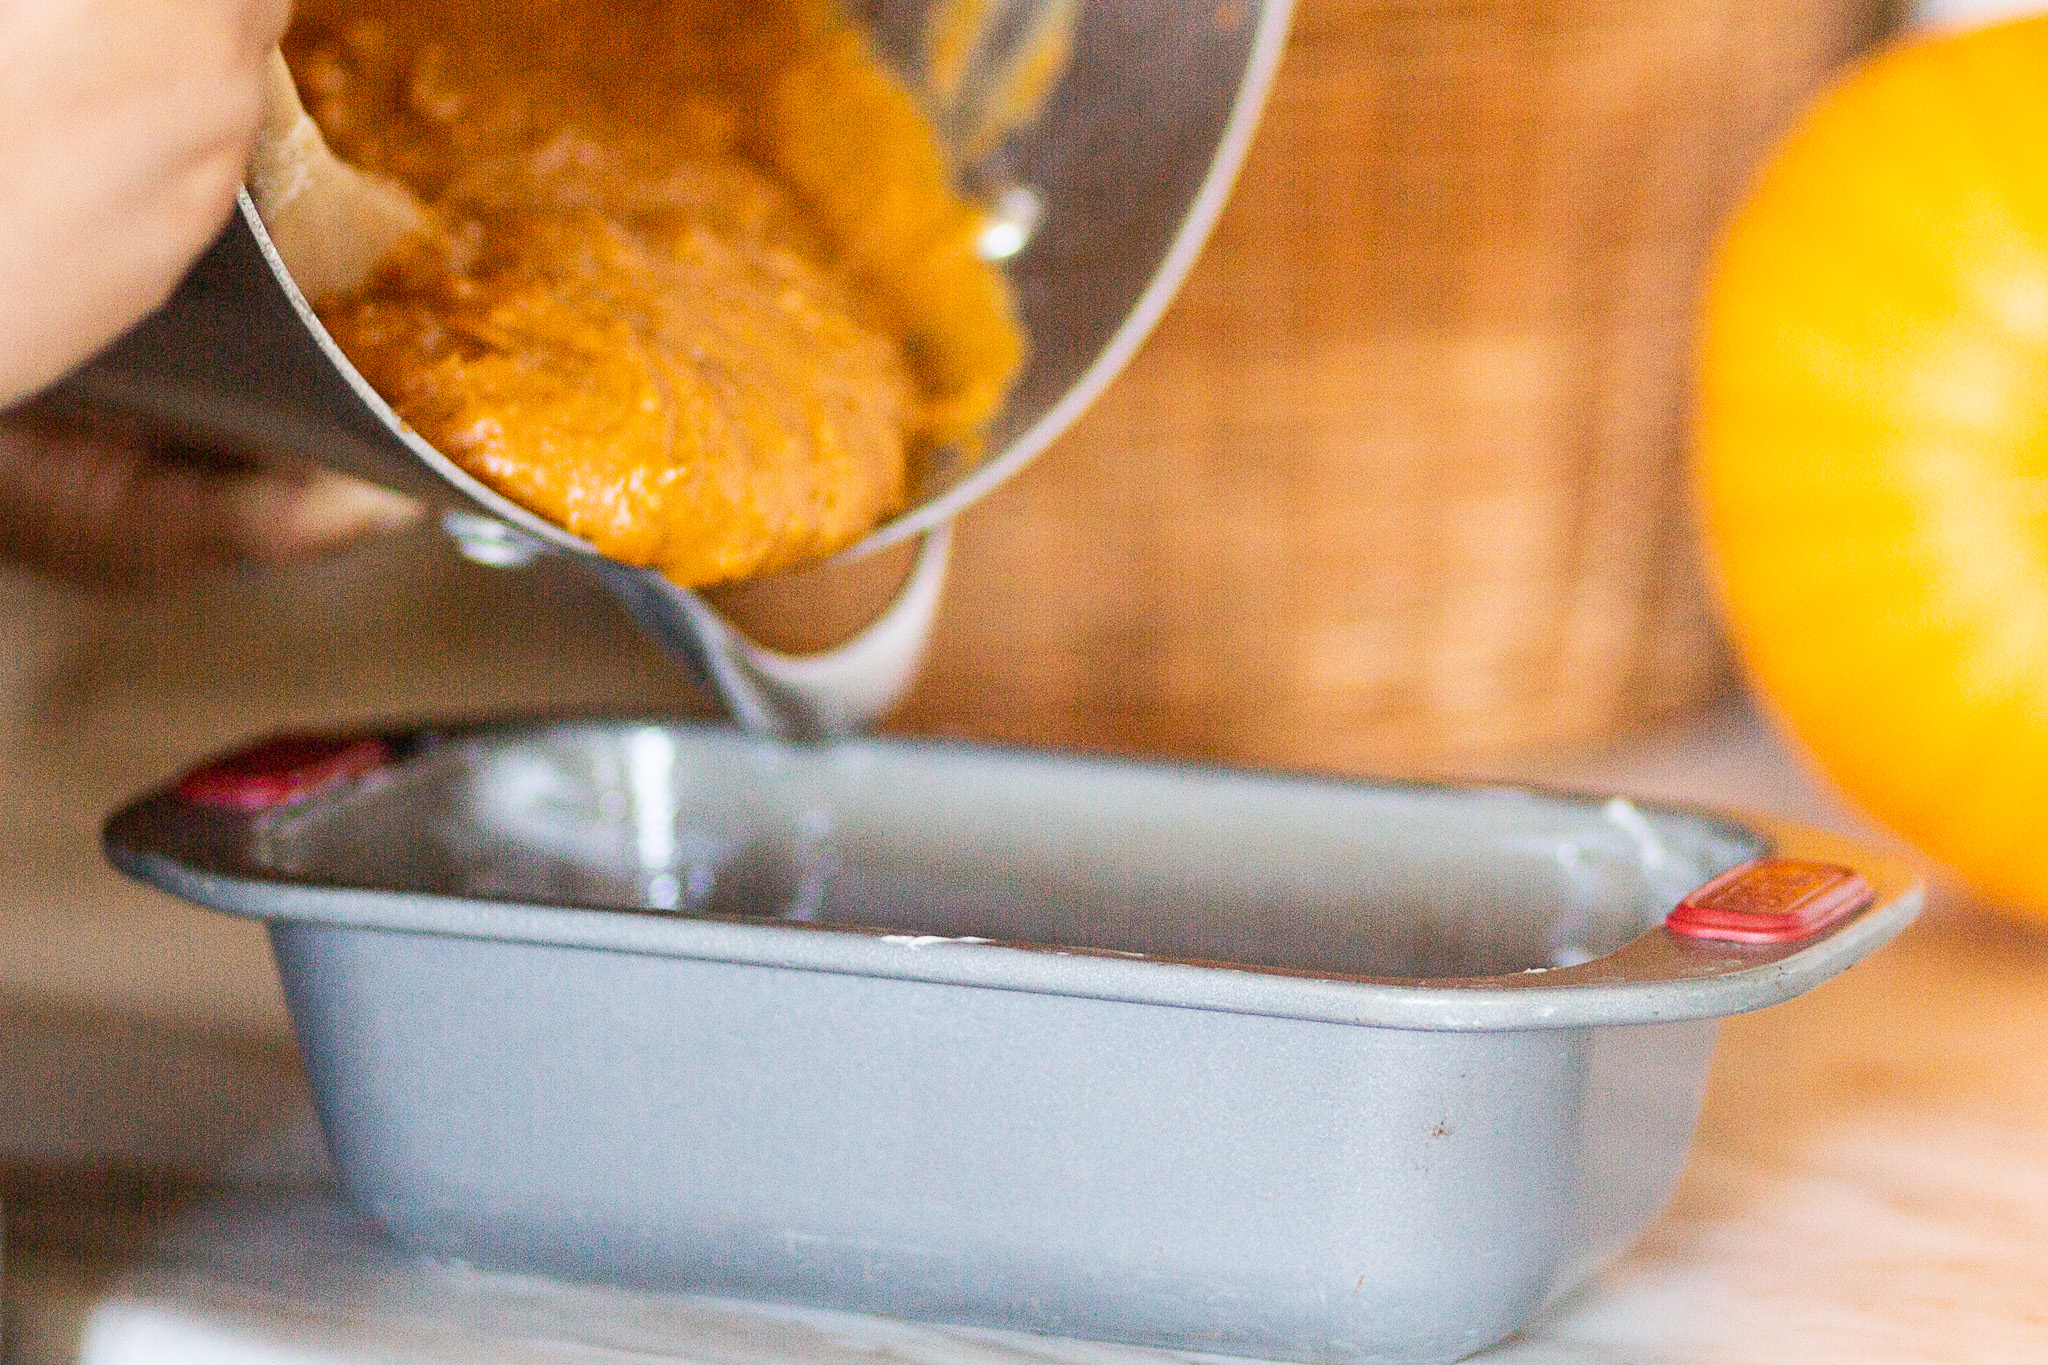 pumpkin bread batter getting poured into pan